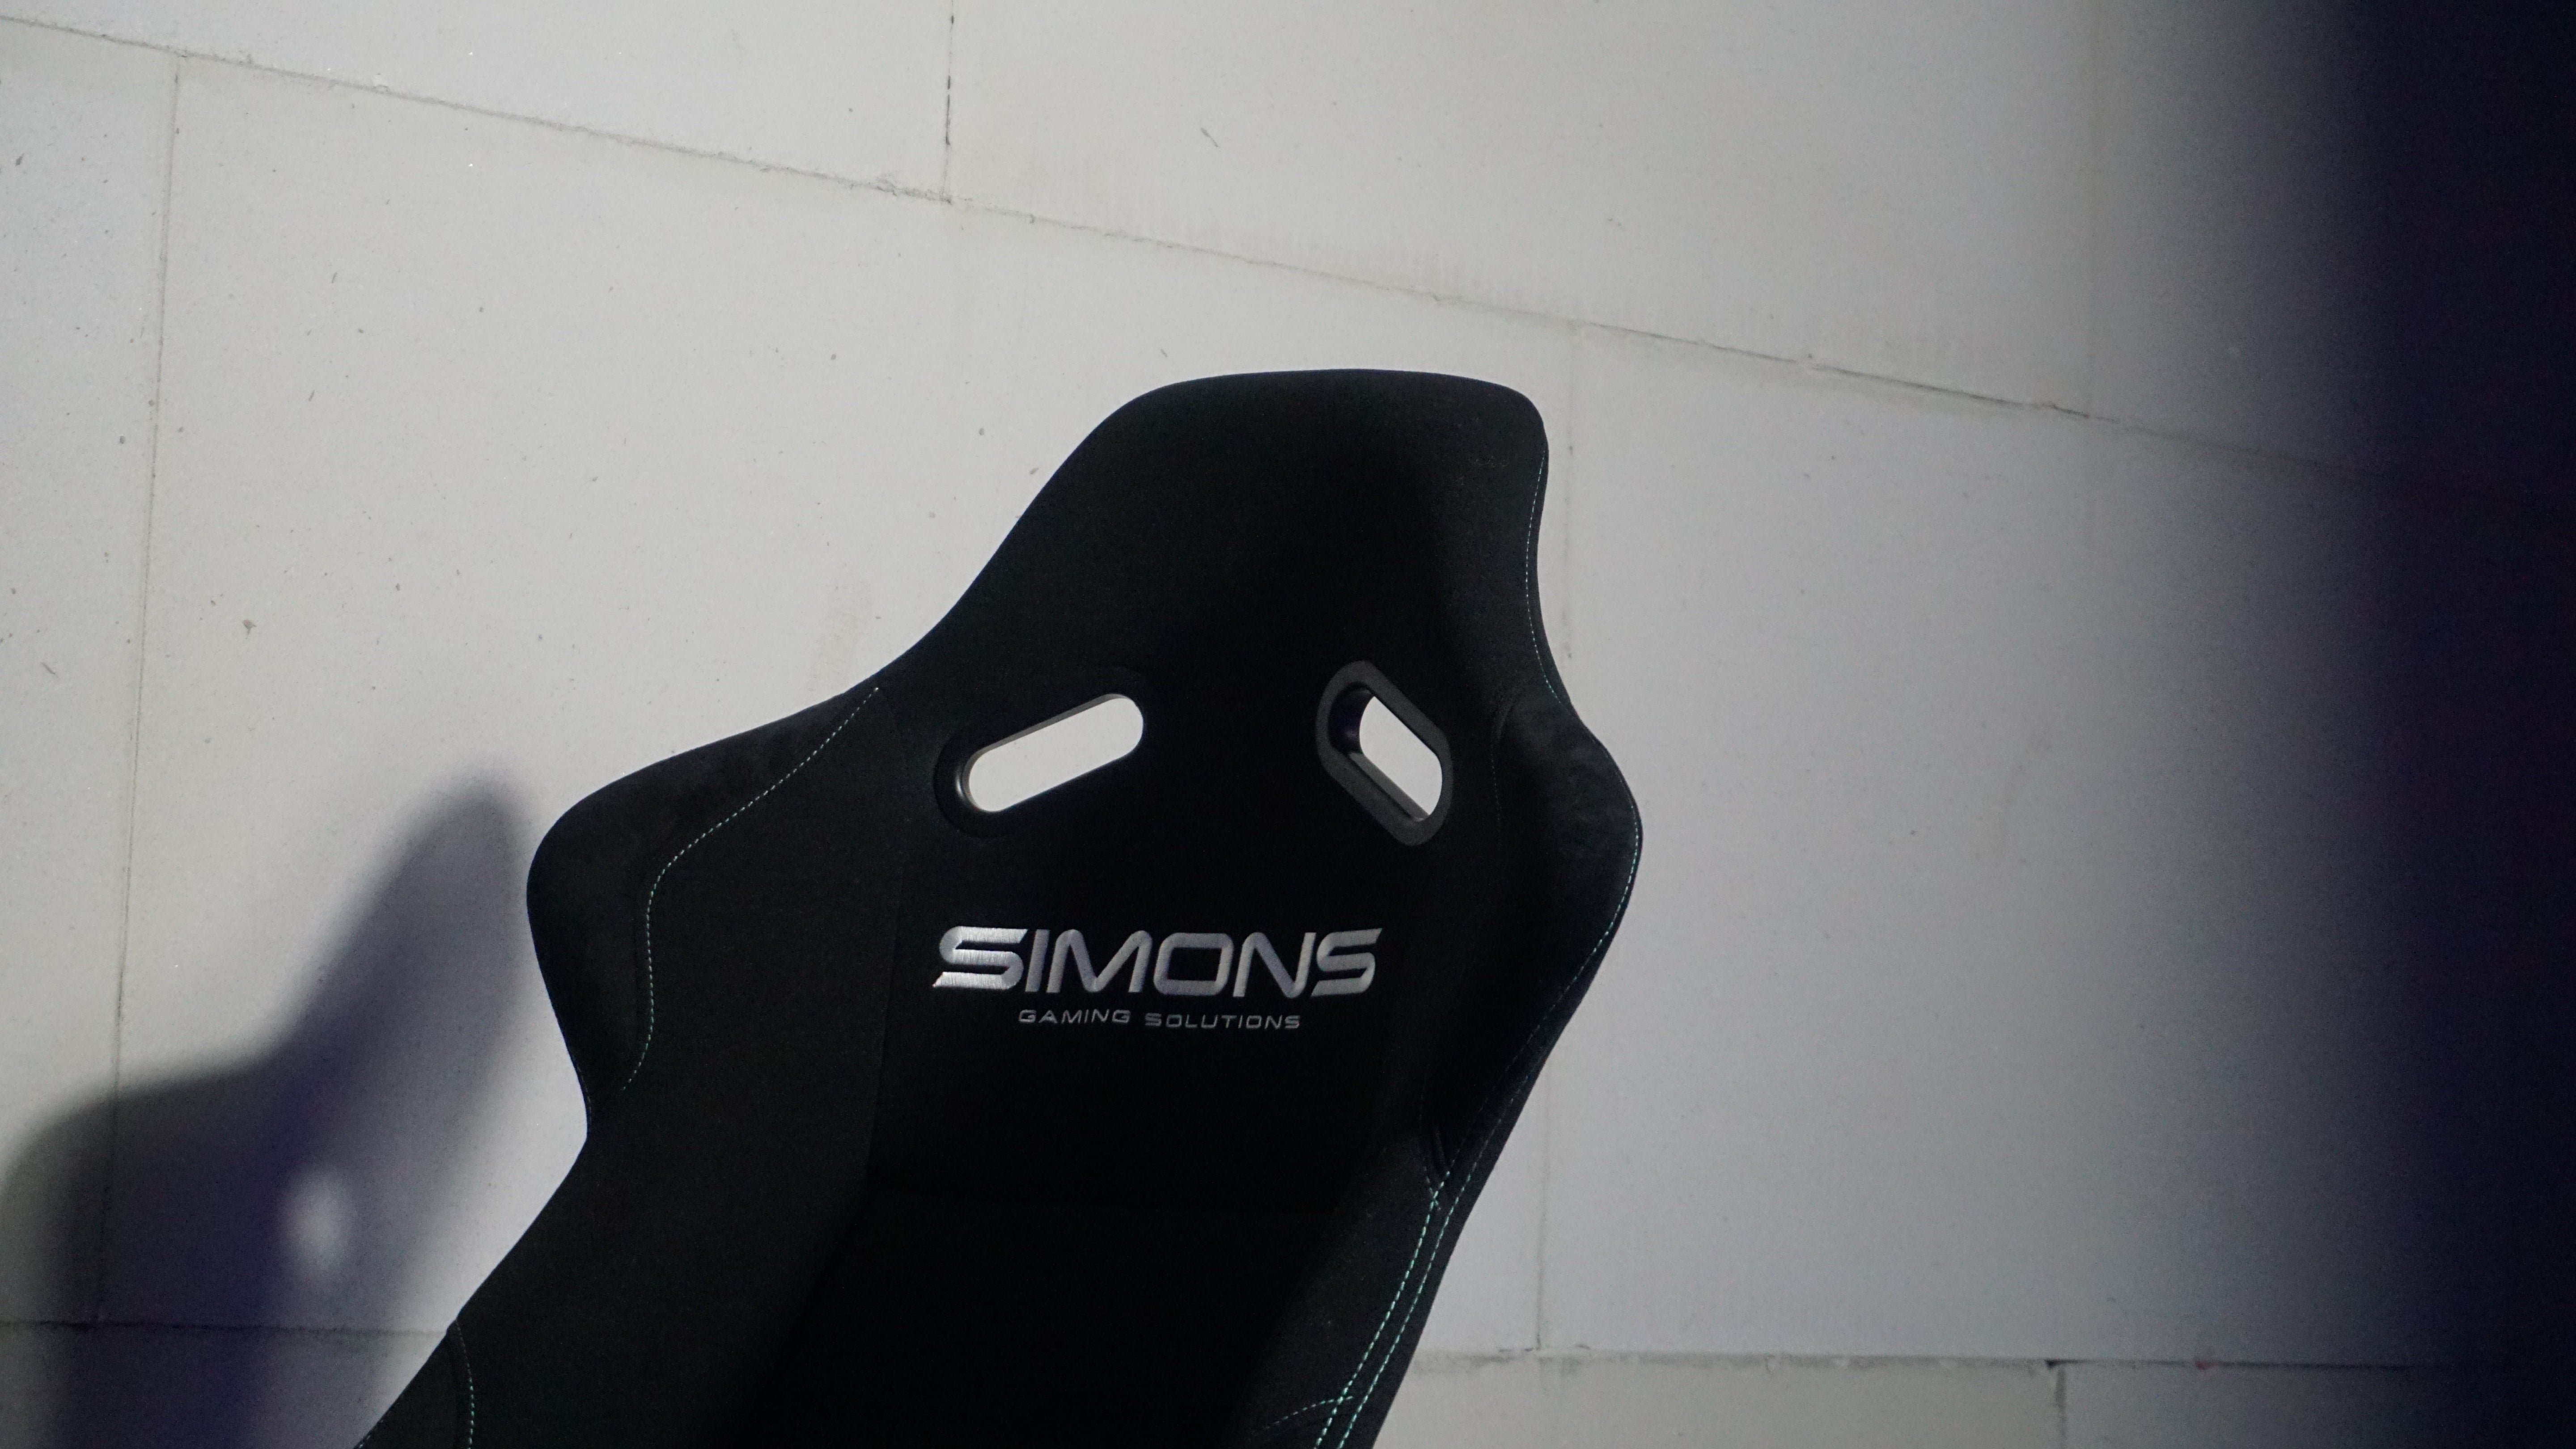 Simons Gaming Solutions S1.9